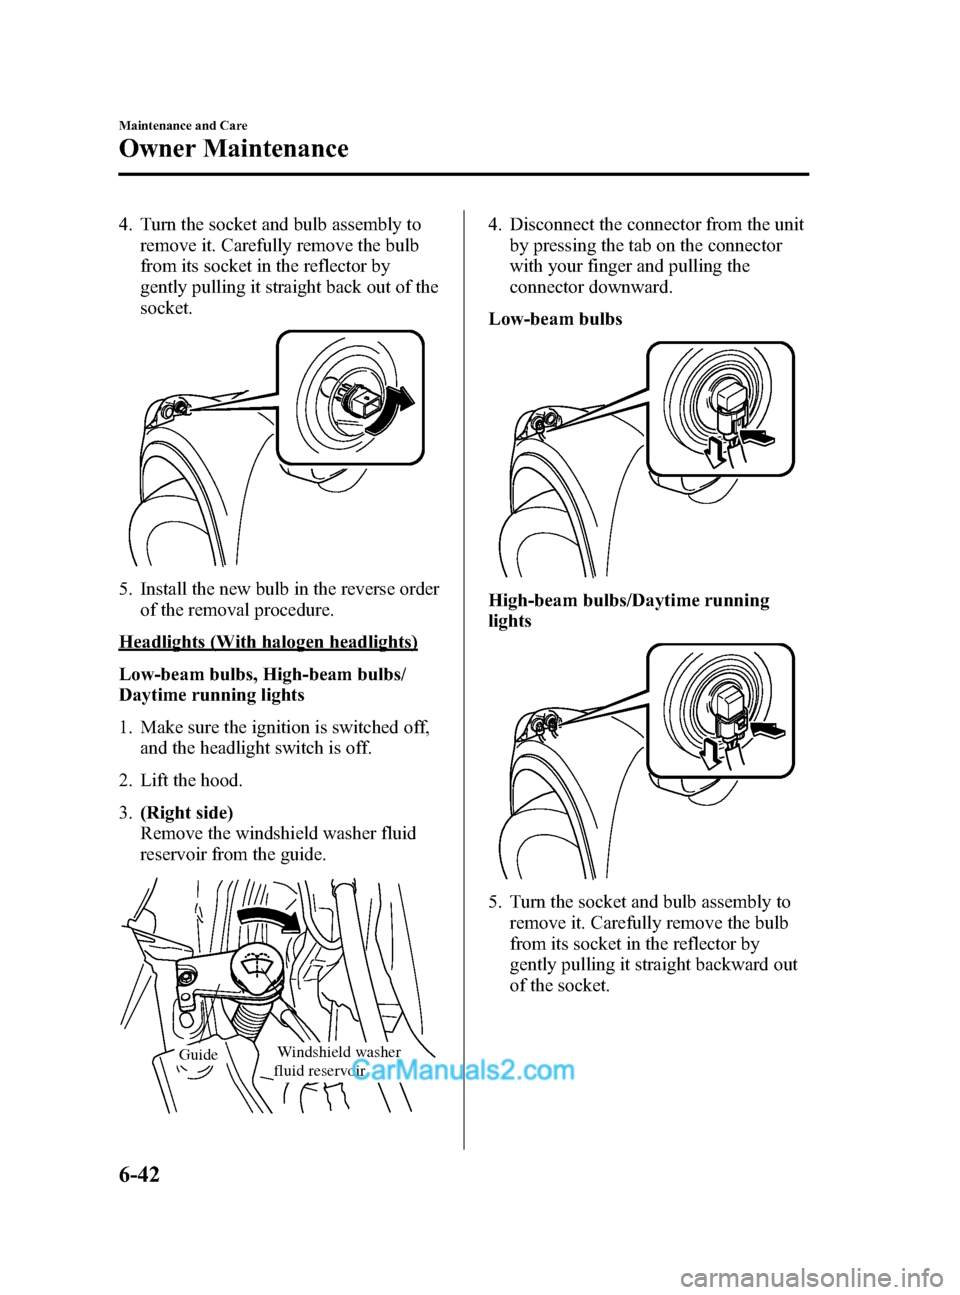 MAZDA MODEL CX-5 2015  Owners Manual (in English) Black plate (402,1)
4. Turn the socket and bulb assembly toremove it. Carefully remove the bulb
from its socket in the reflector by
gently pulling it straight back out of the
socket.
5. Install the ne